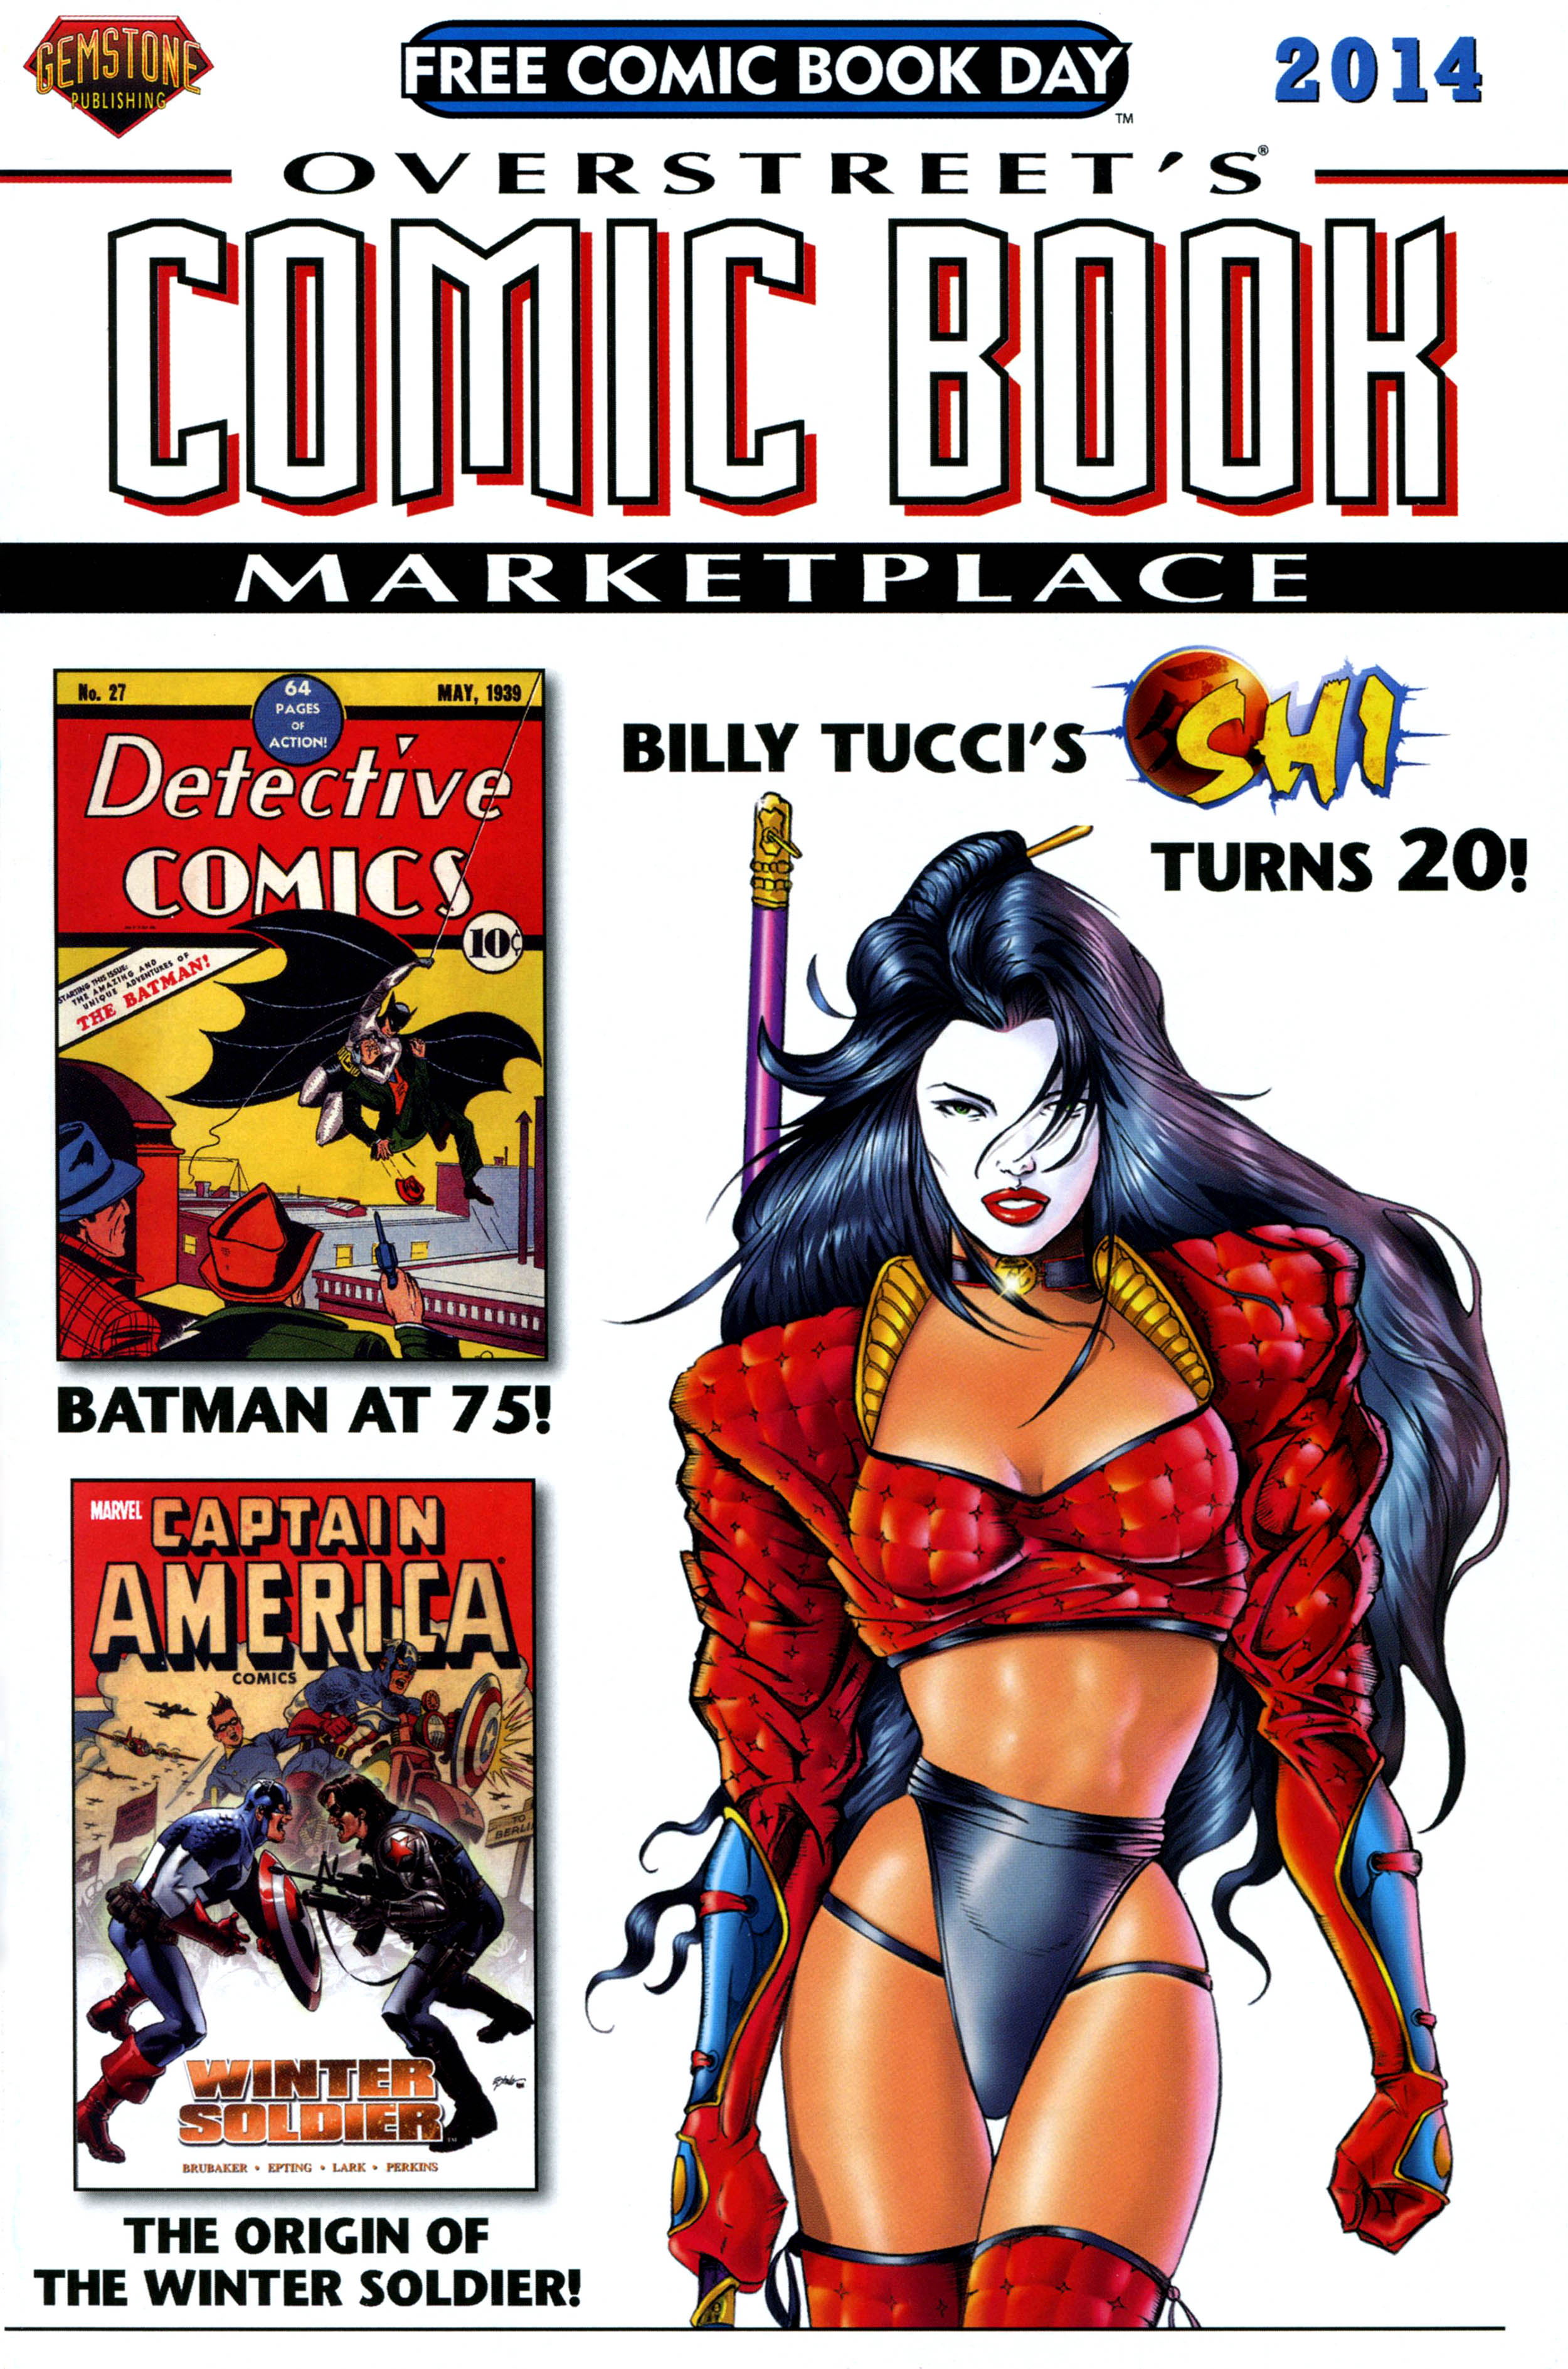 Read online Free Comic Book Day 2014 comic -  Issue # Overstreet s Comic Book Marketplace 04 - 1